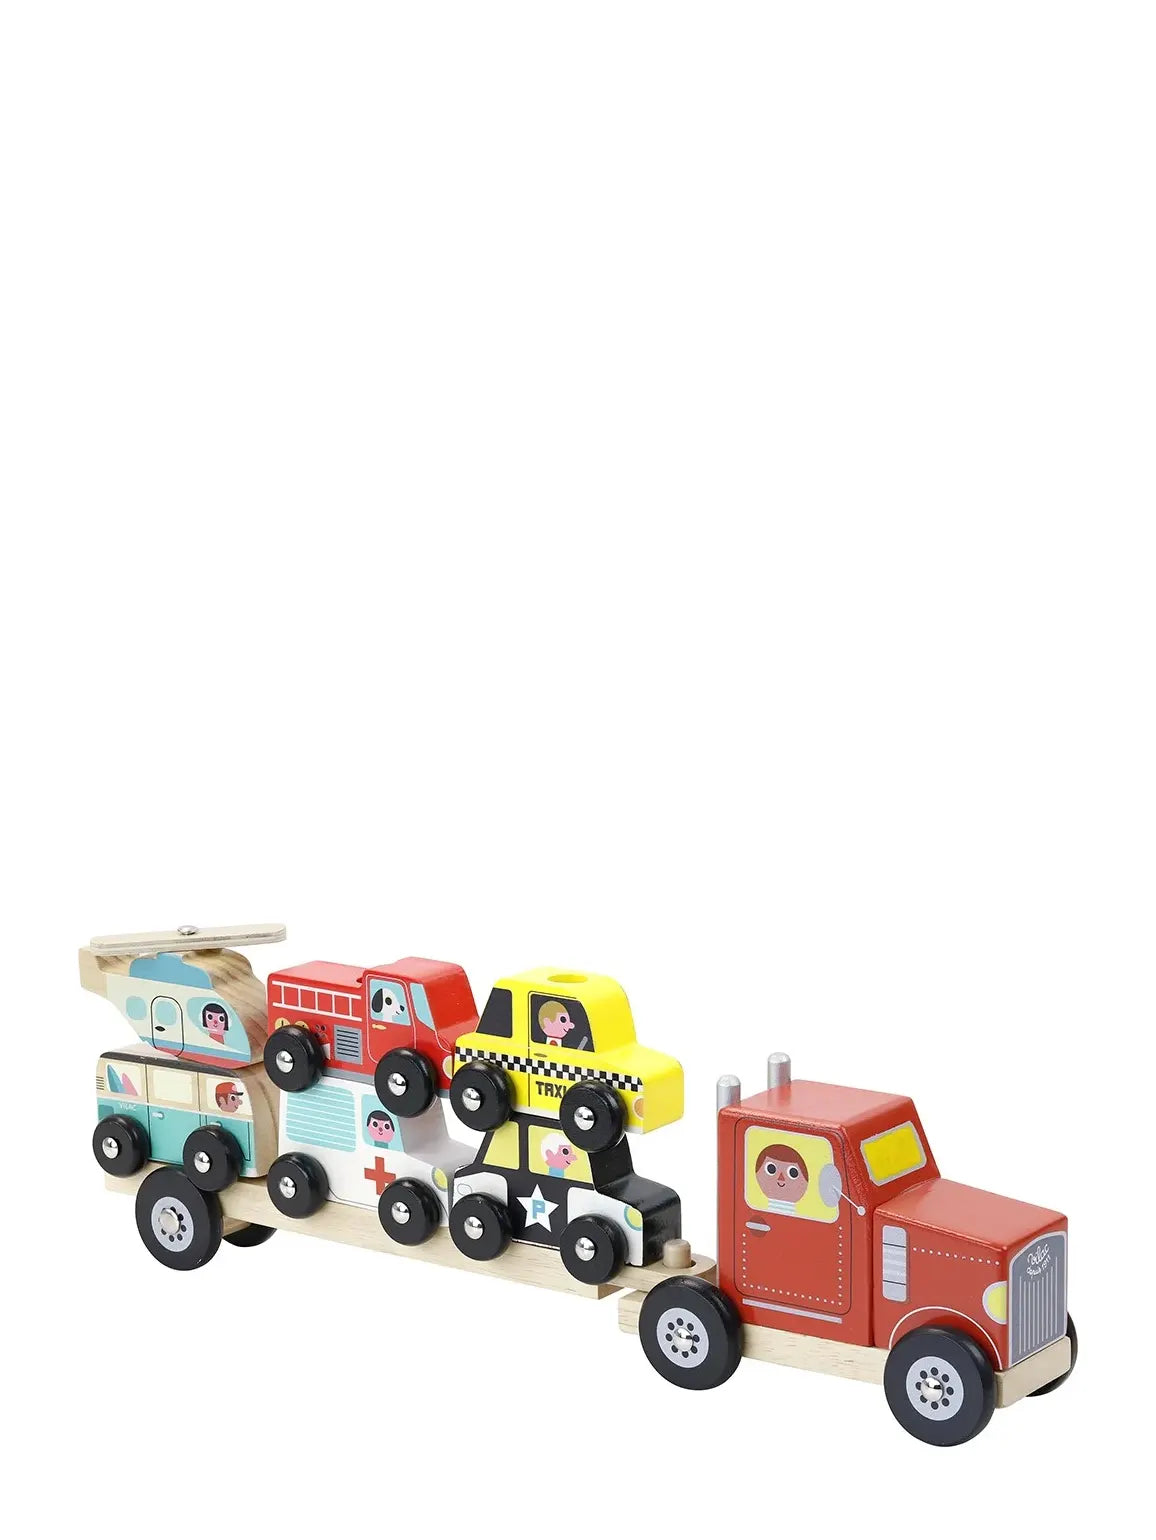 Truck and trailer stacking game